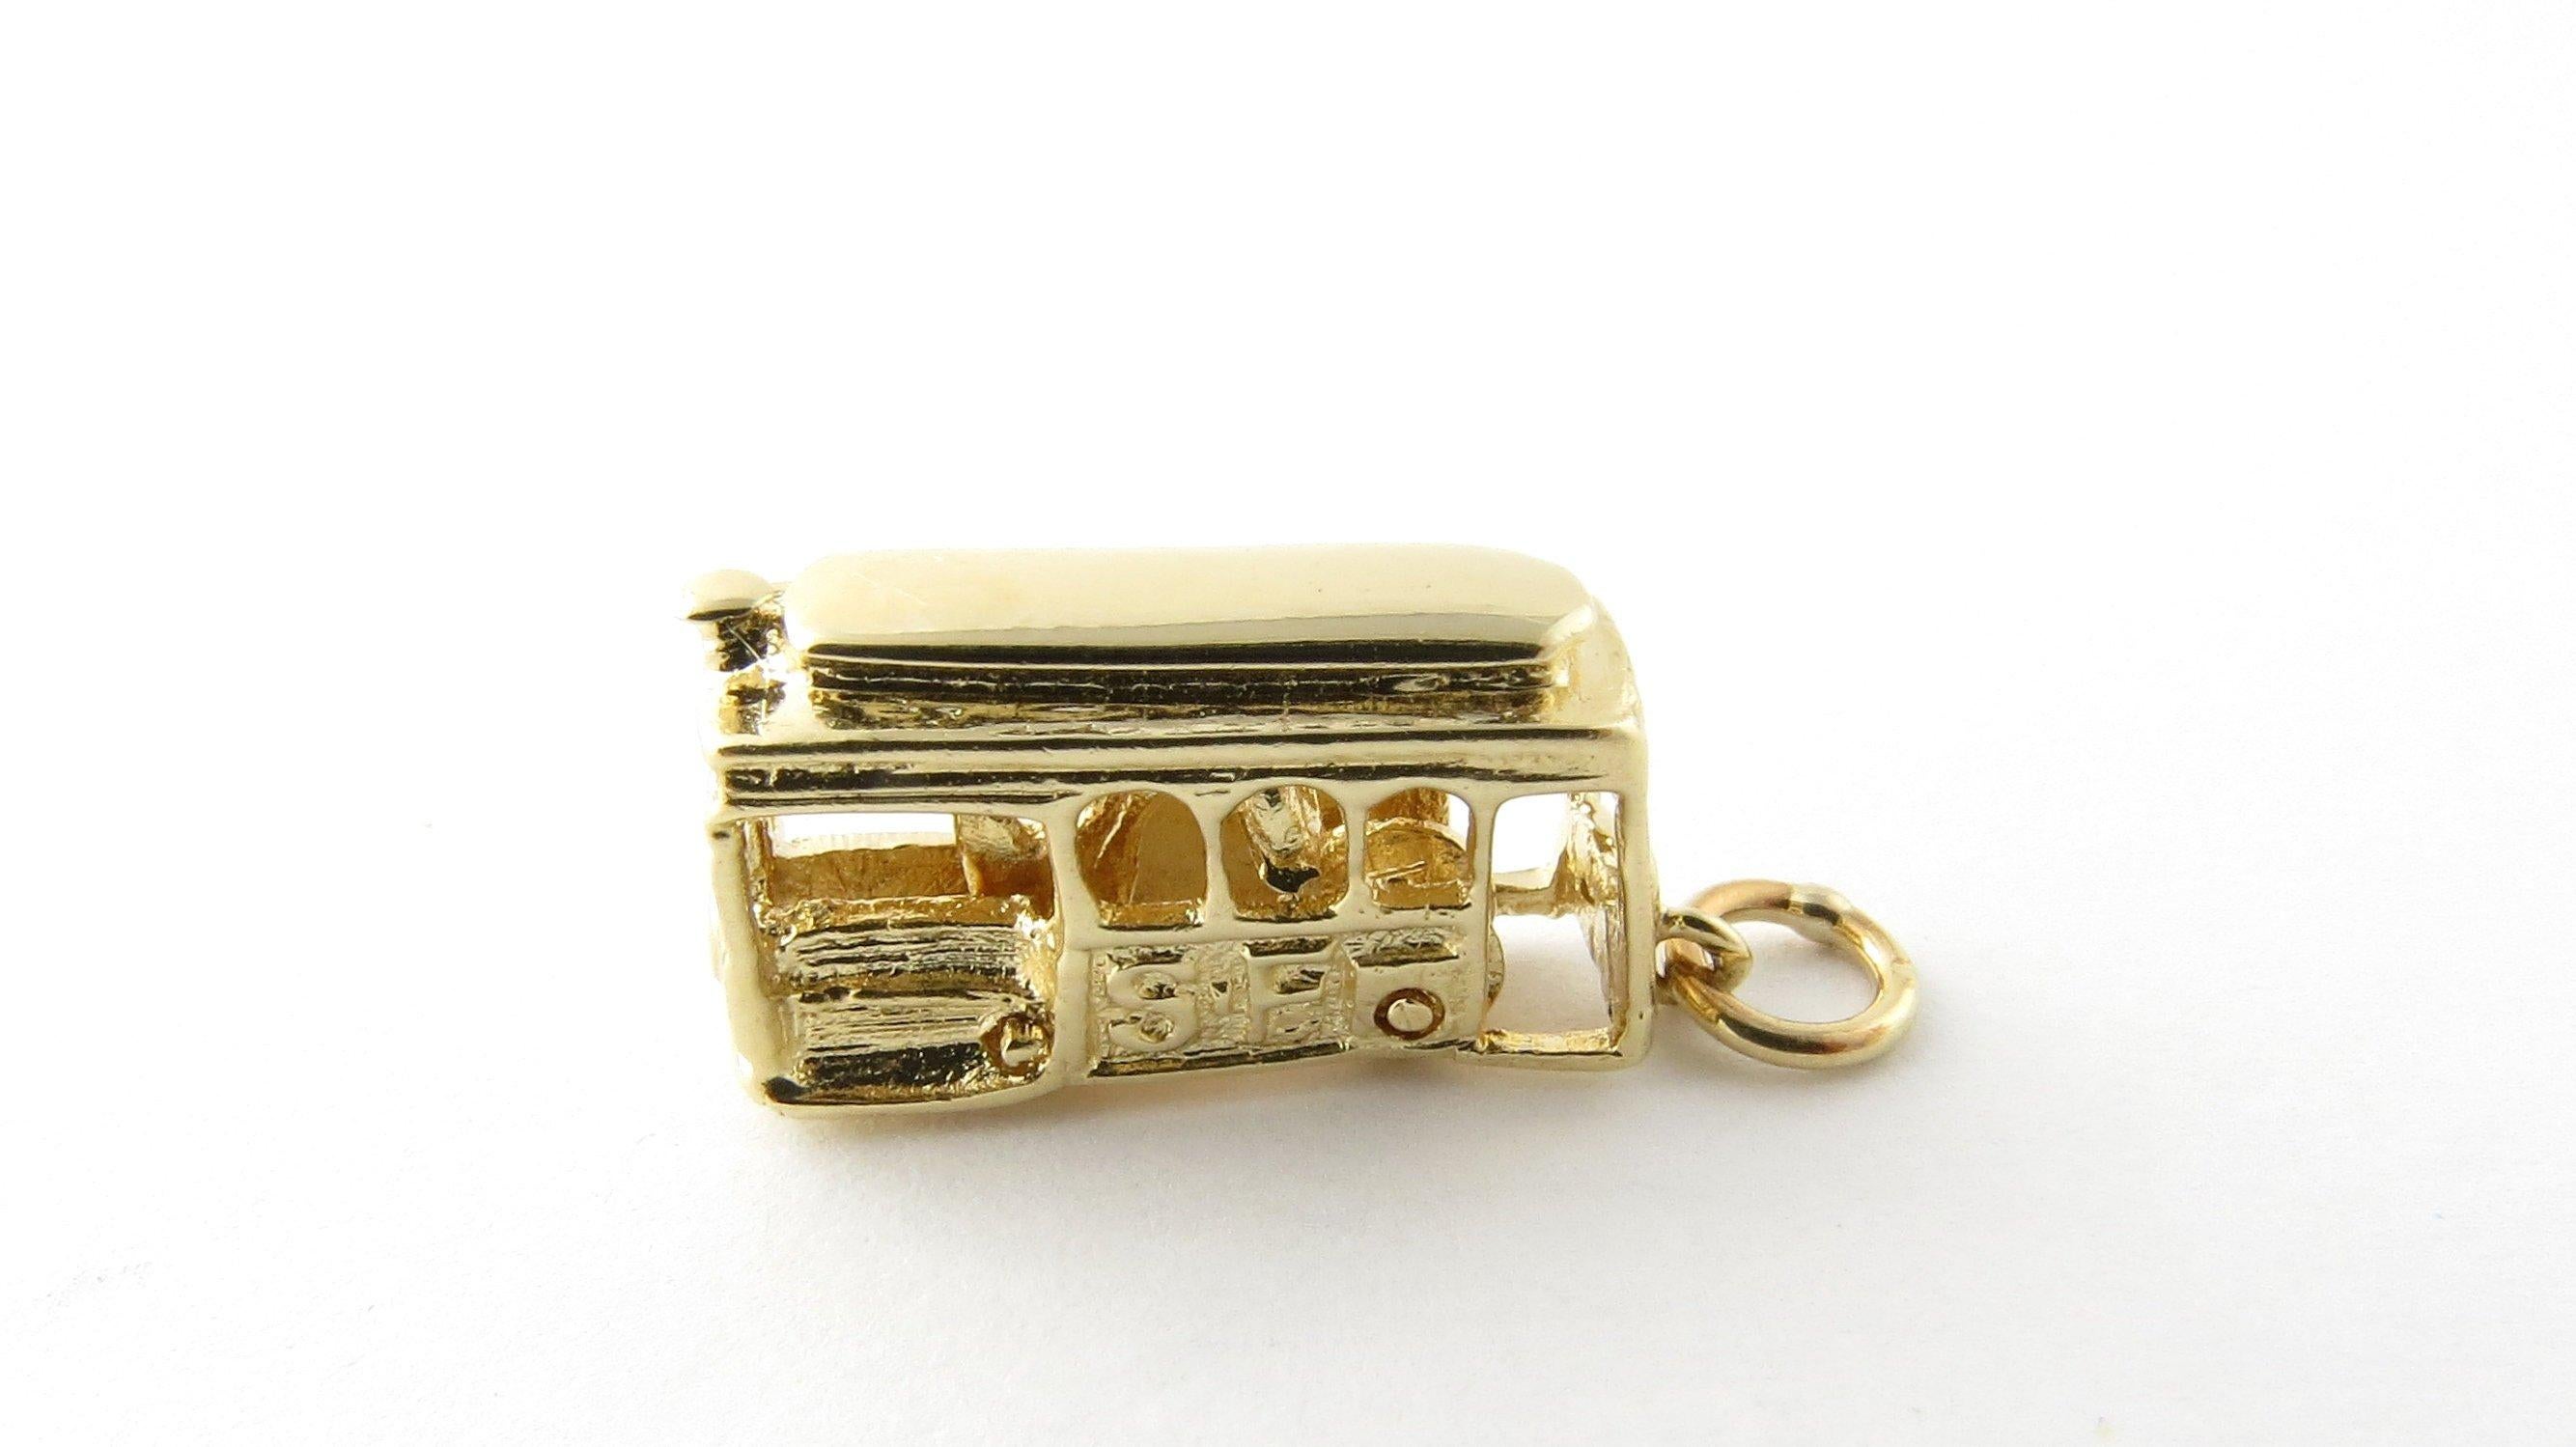 Vintage 14 Karat Yellow Gold Mechanical San Francisco Cable Car Charm- 
Take a ride on the trolley! 
This 3D charm features a miniature San Francisco cable car with moving wheels and driver! Meticulously detailed in 14K yellow gold. 
Size: 11 mm x